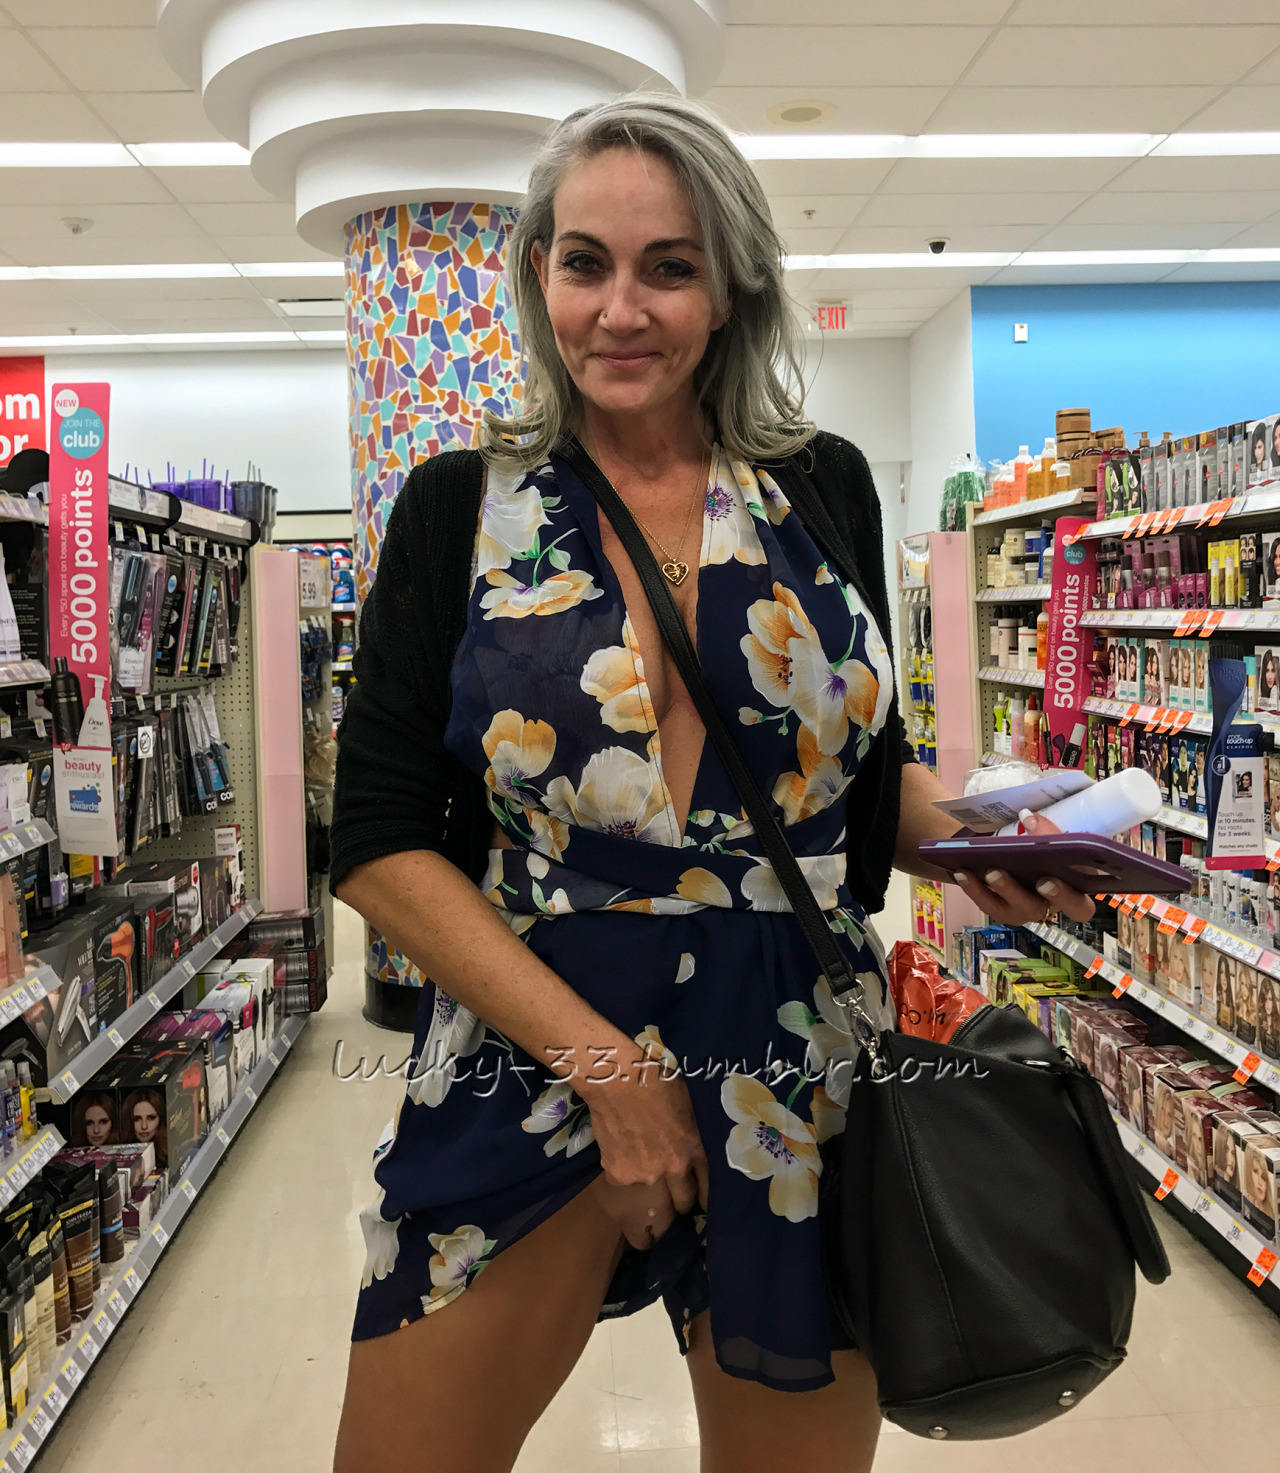 Jan 2017Miami, FLContinuing the tradition of her flashing at this same Walgreens